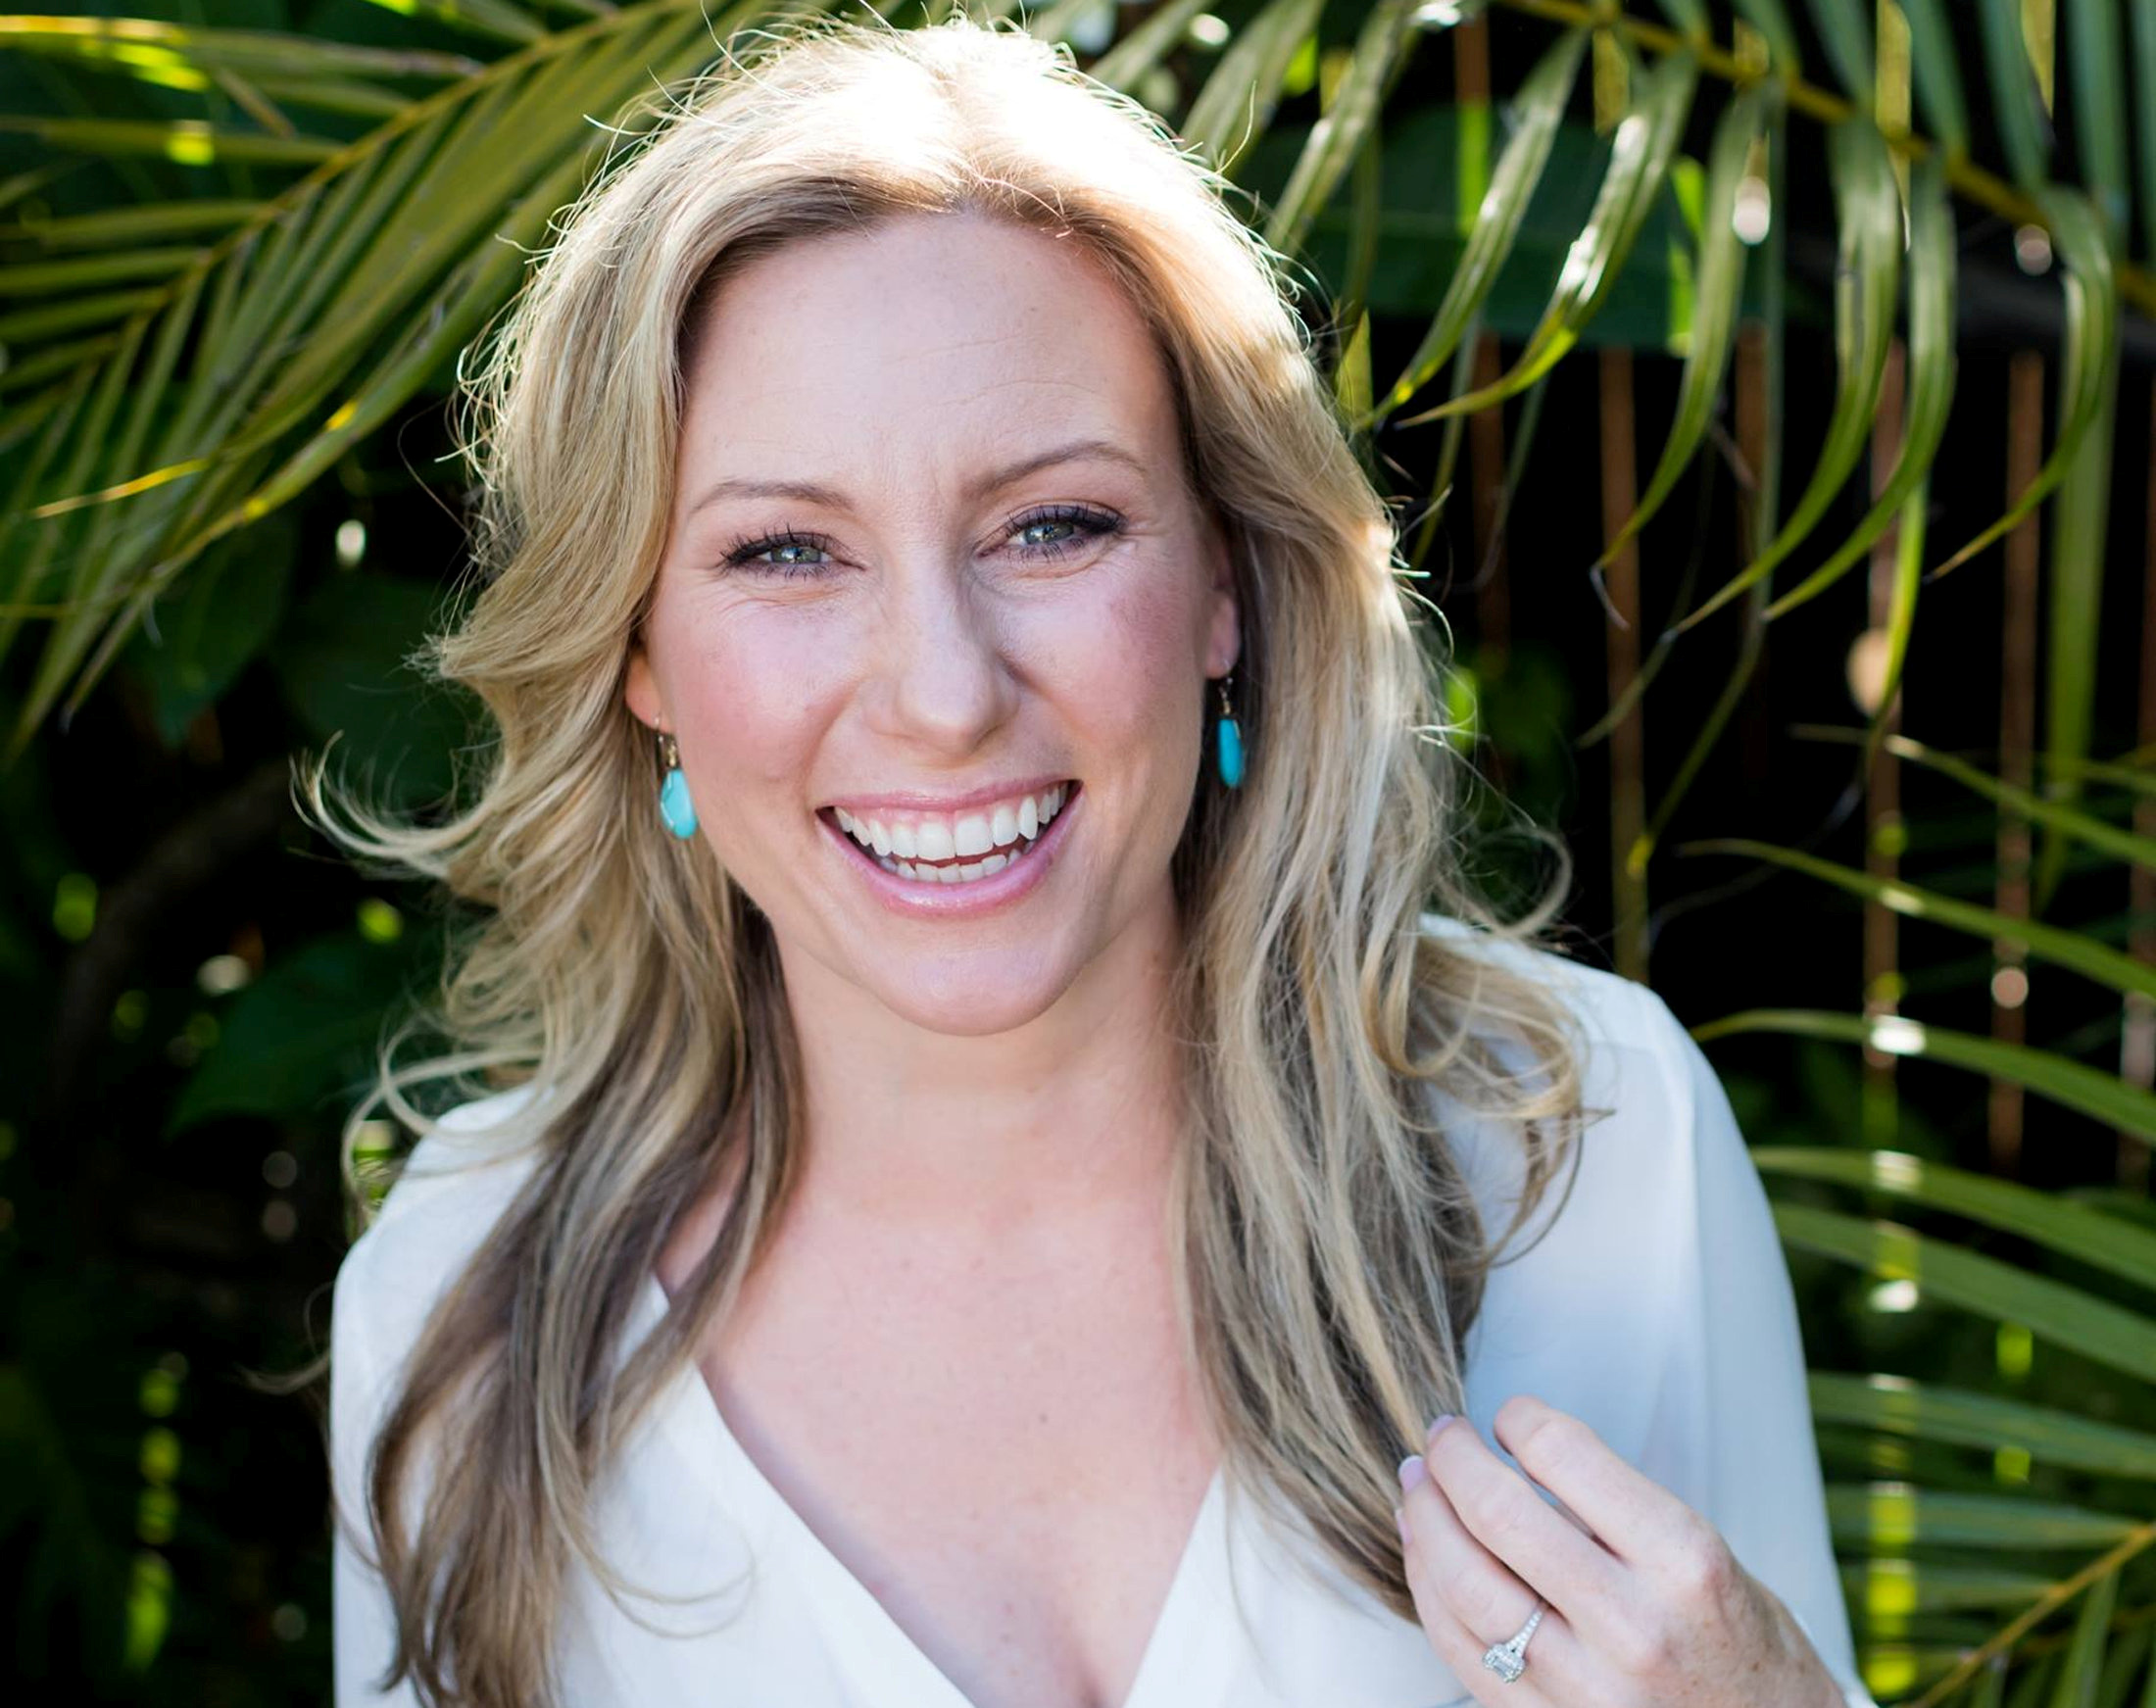 PHOTO: Justine Ruszczyk was shot and killed during an incident involving police officers in Minneapolis, Minnesota.